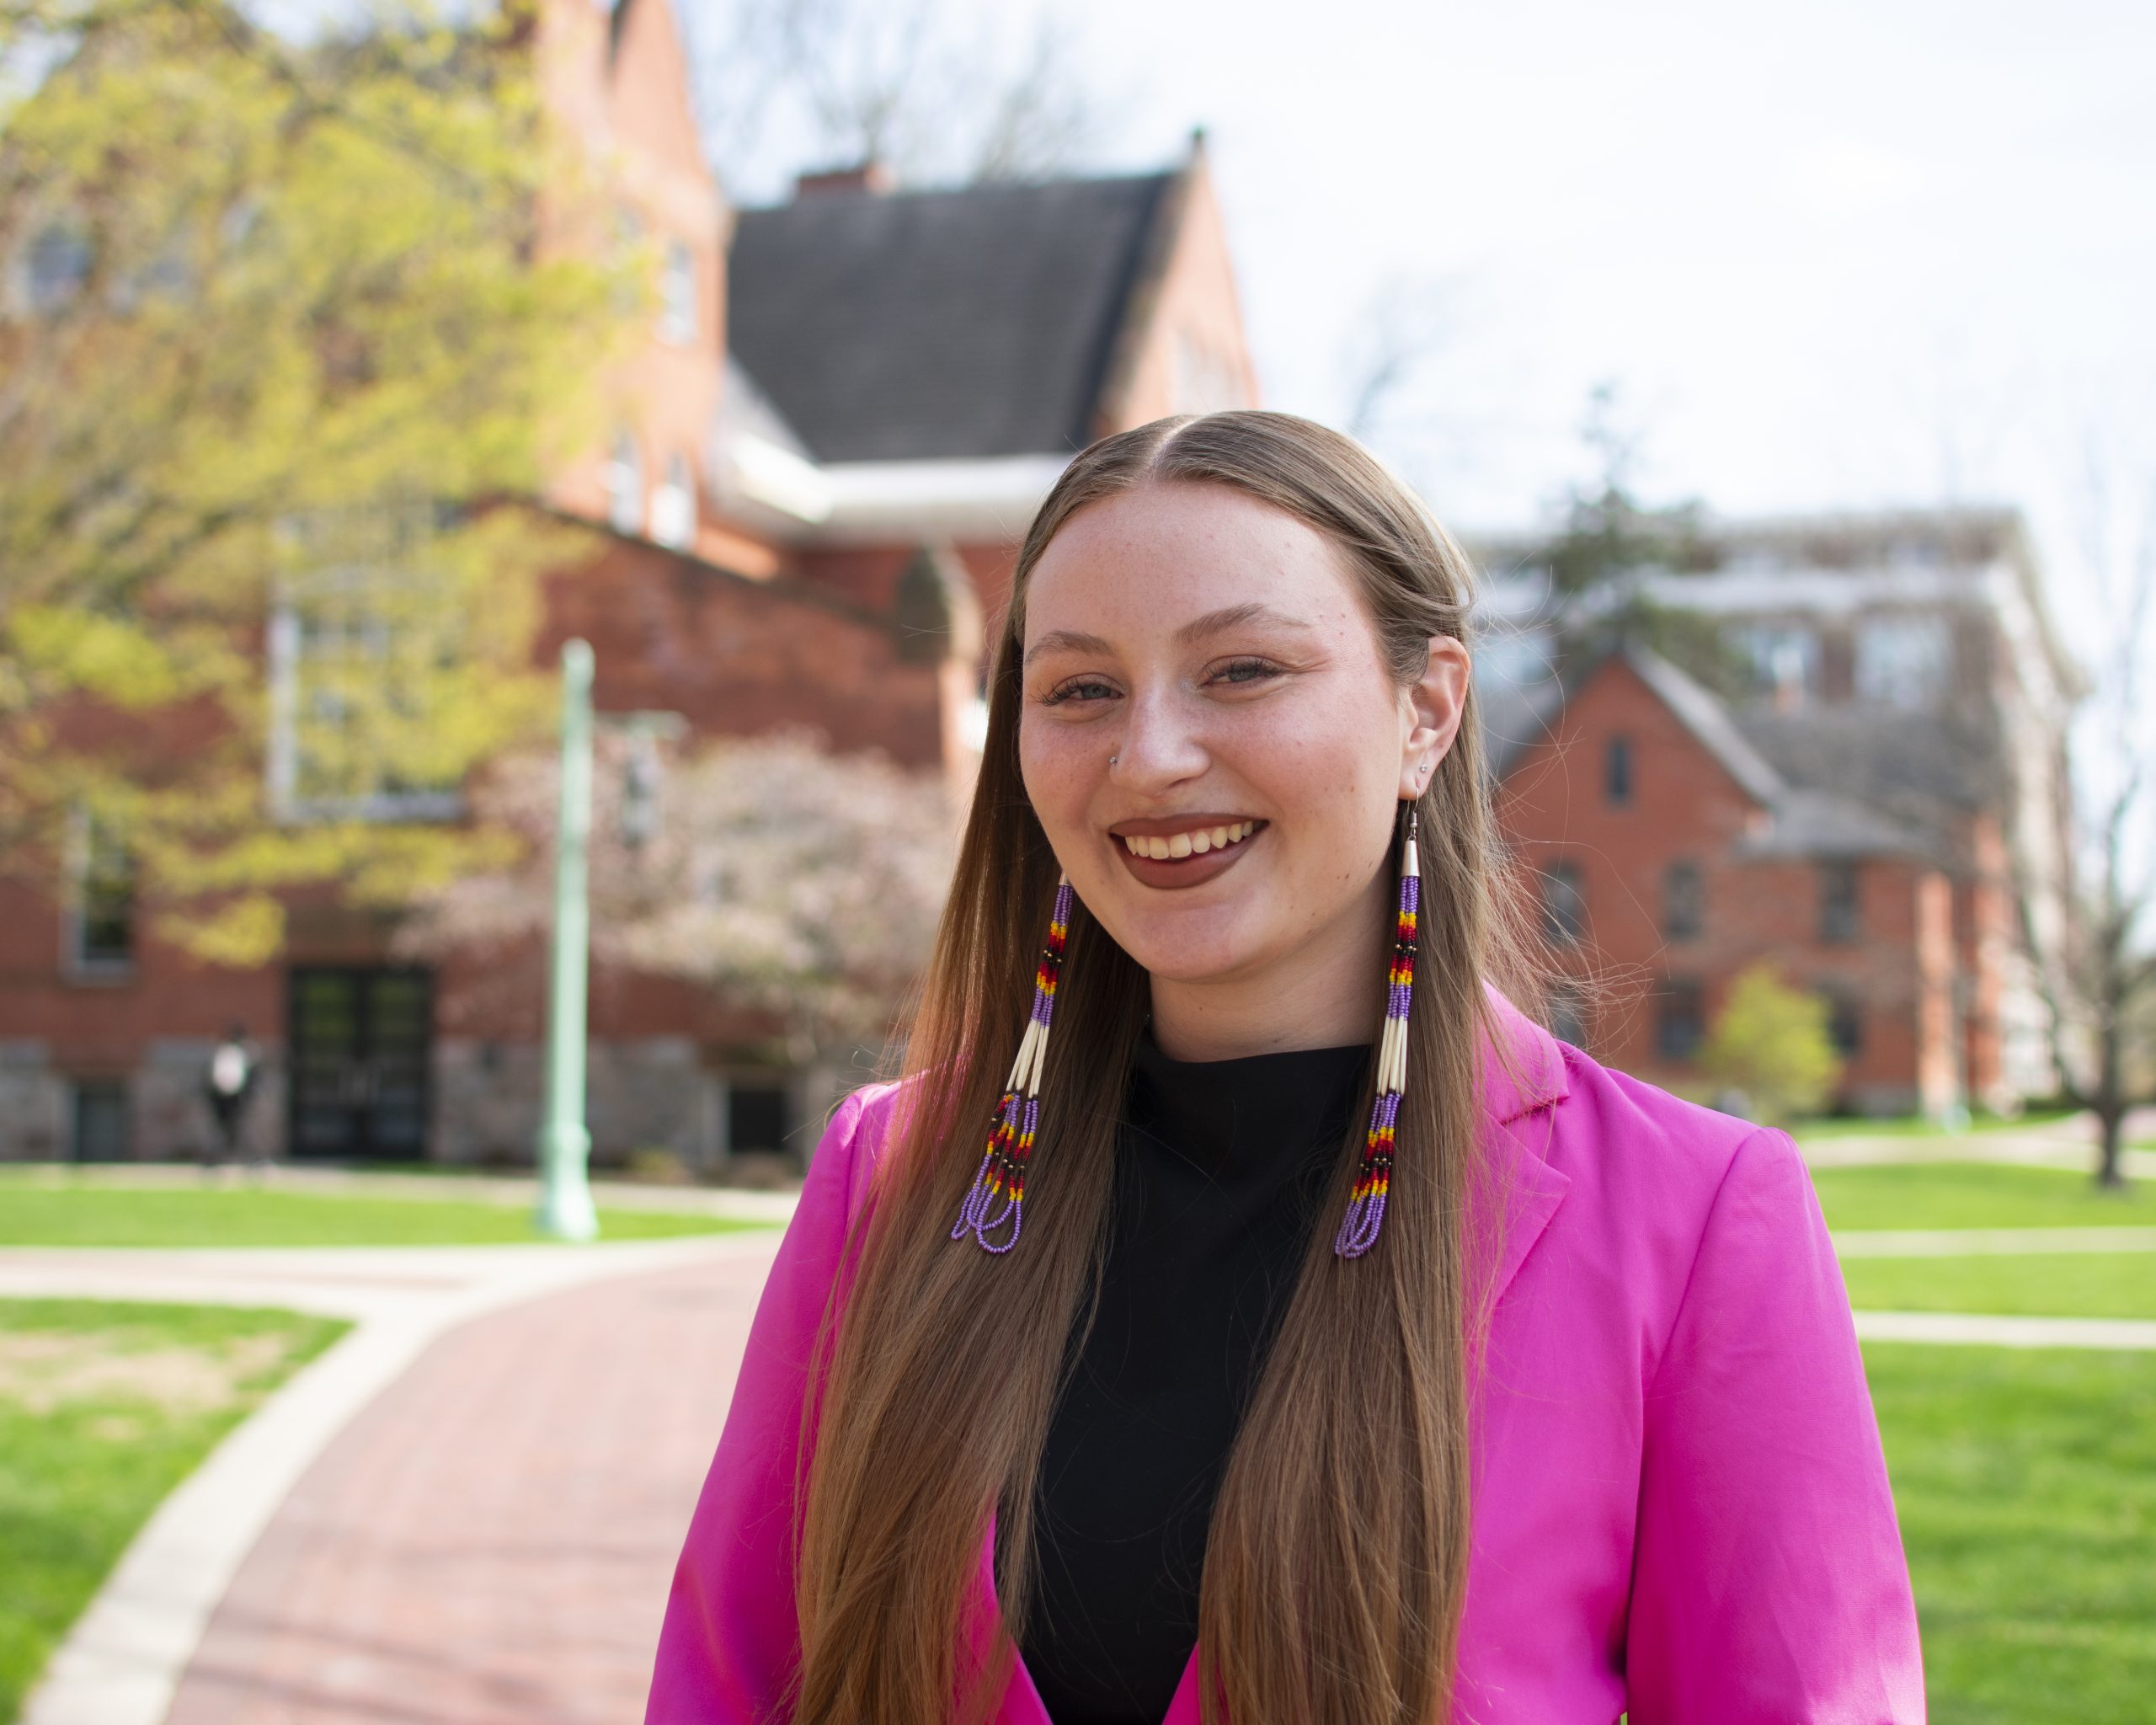 Headshot of a student in a hot pink blazer with long beaded earrings, with a red brick path and two red brick buildings in the background.